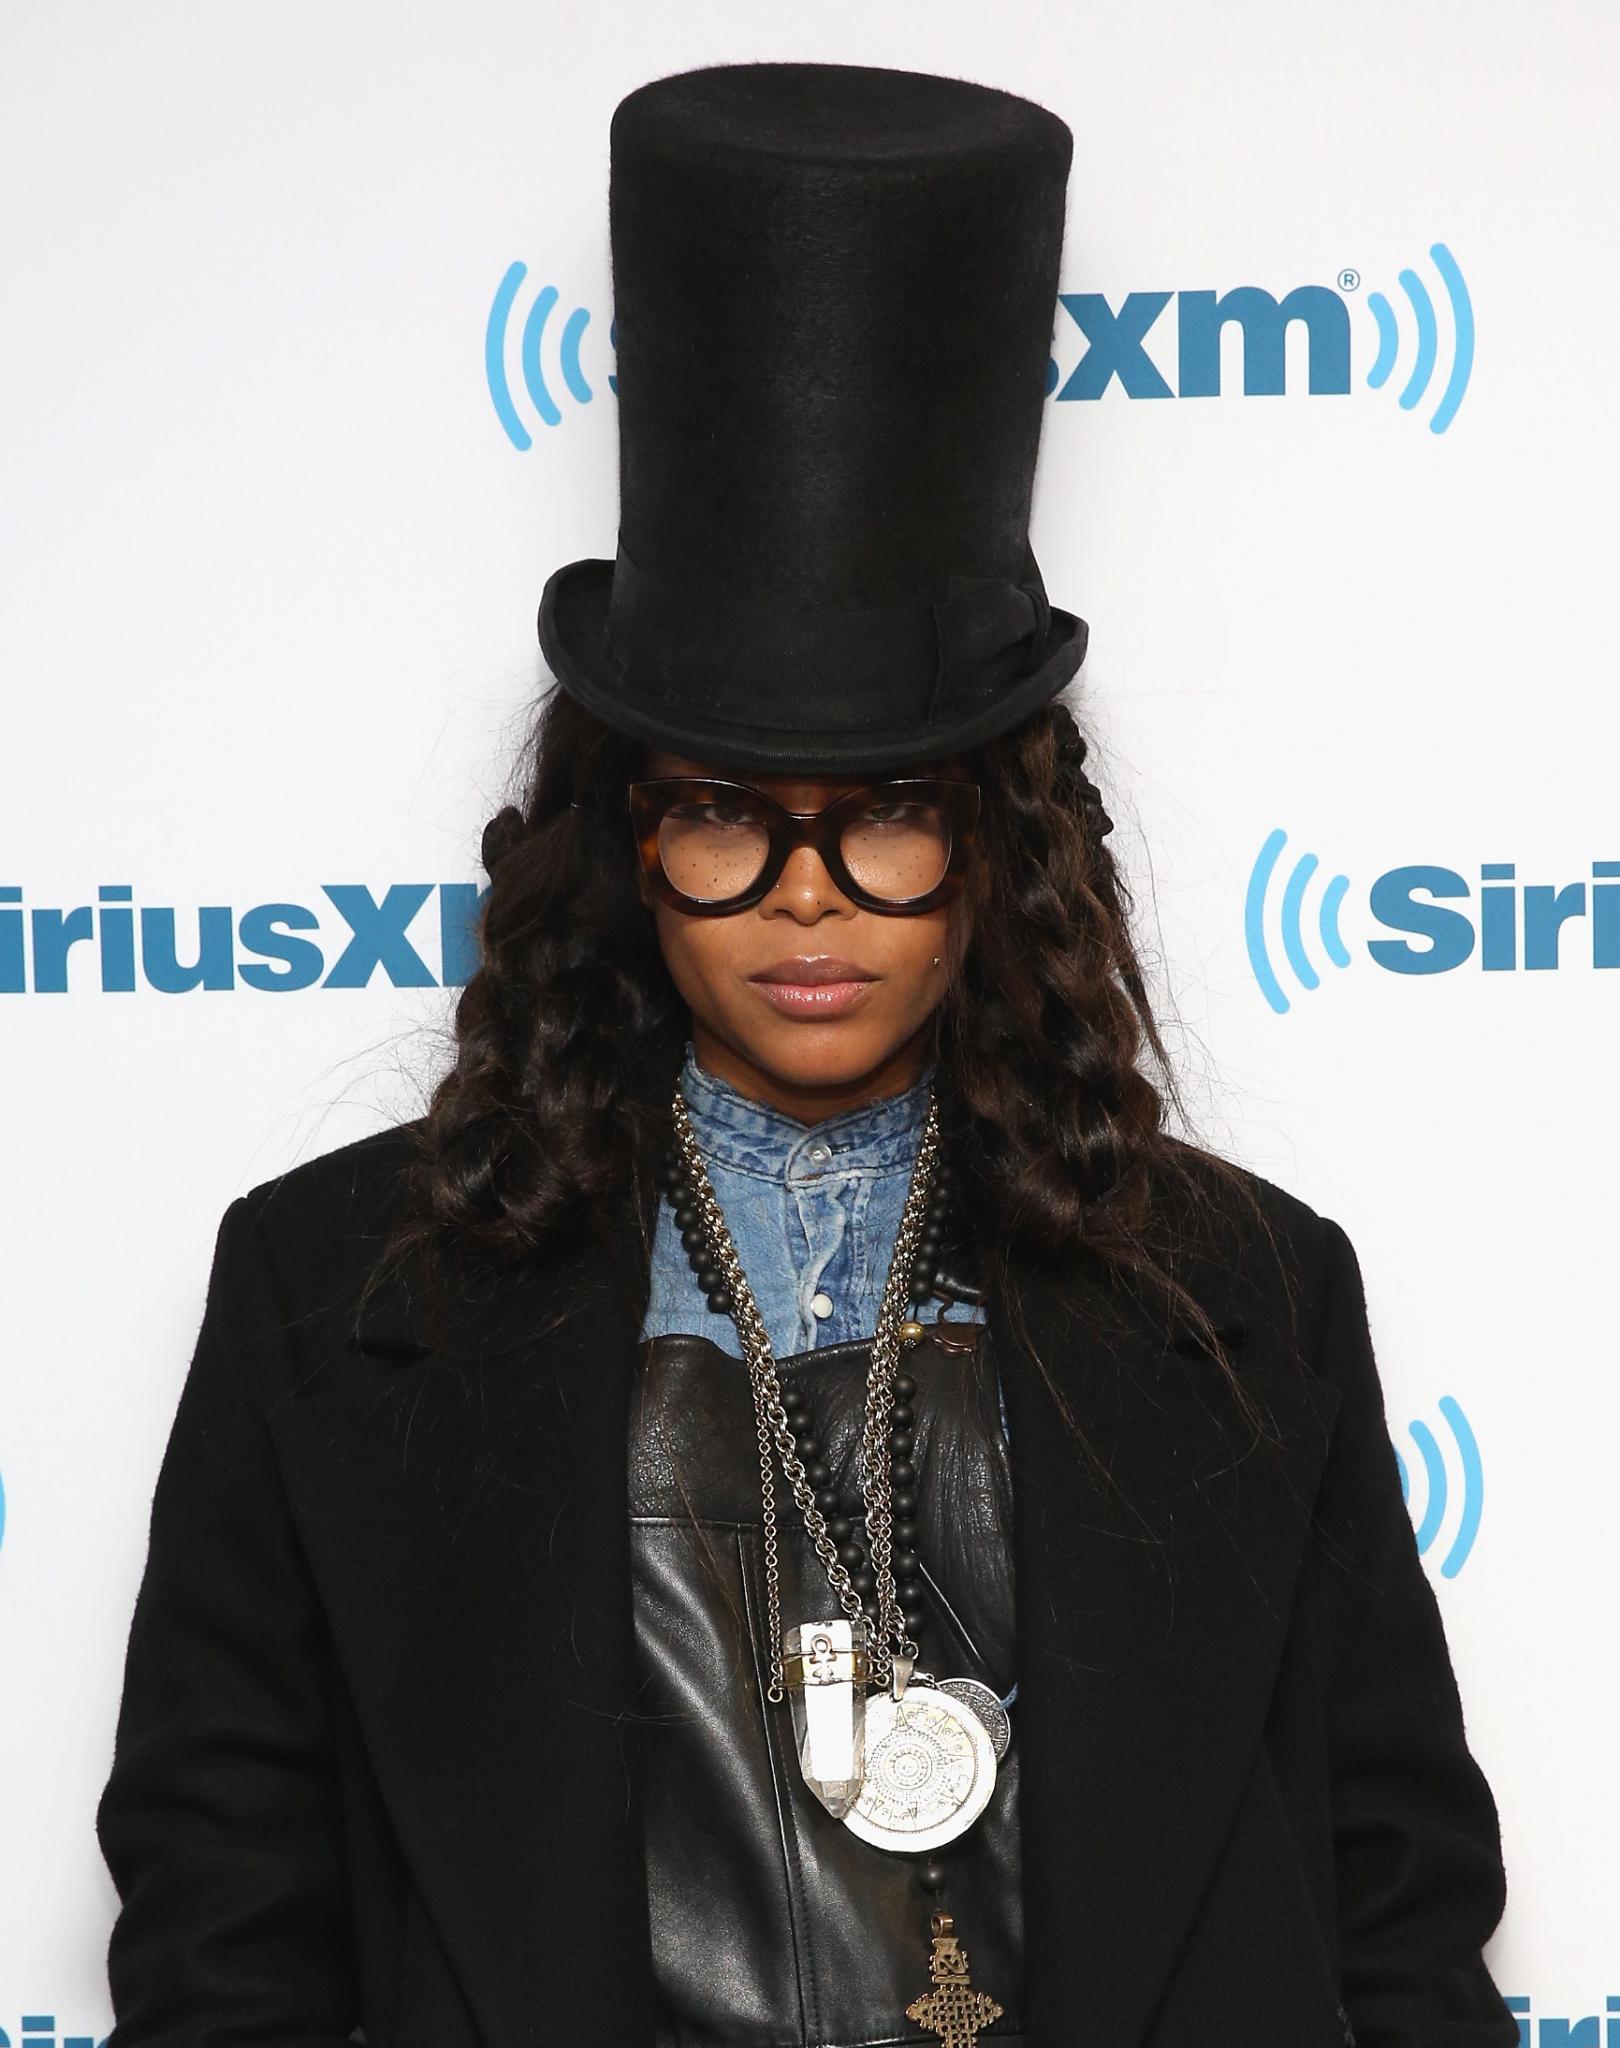 Think You Know Erykah Badu? Let’s See!